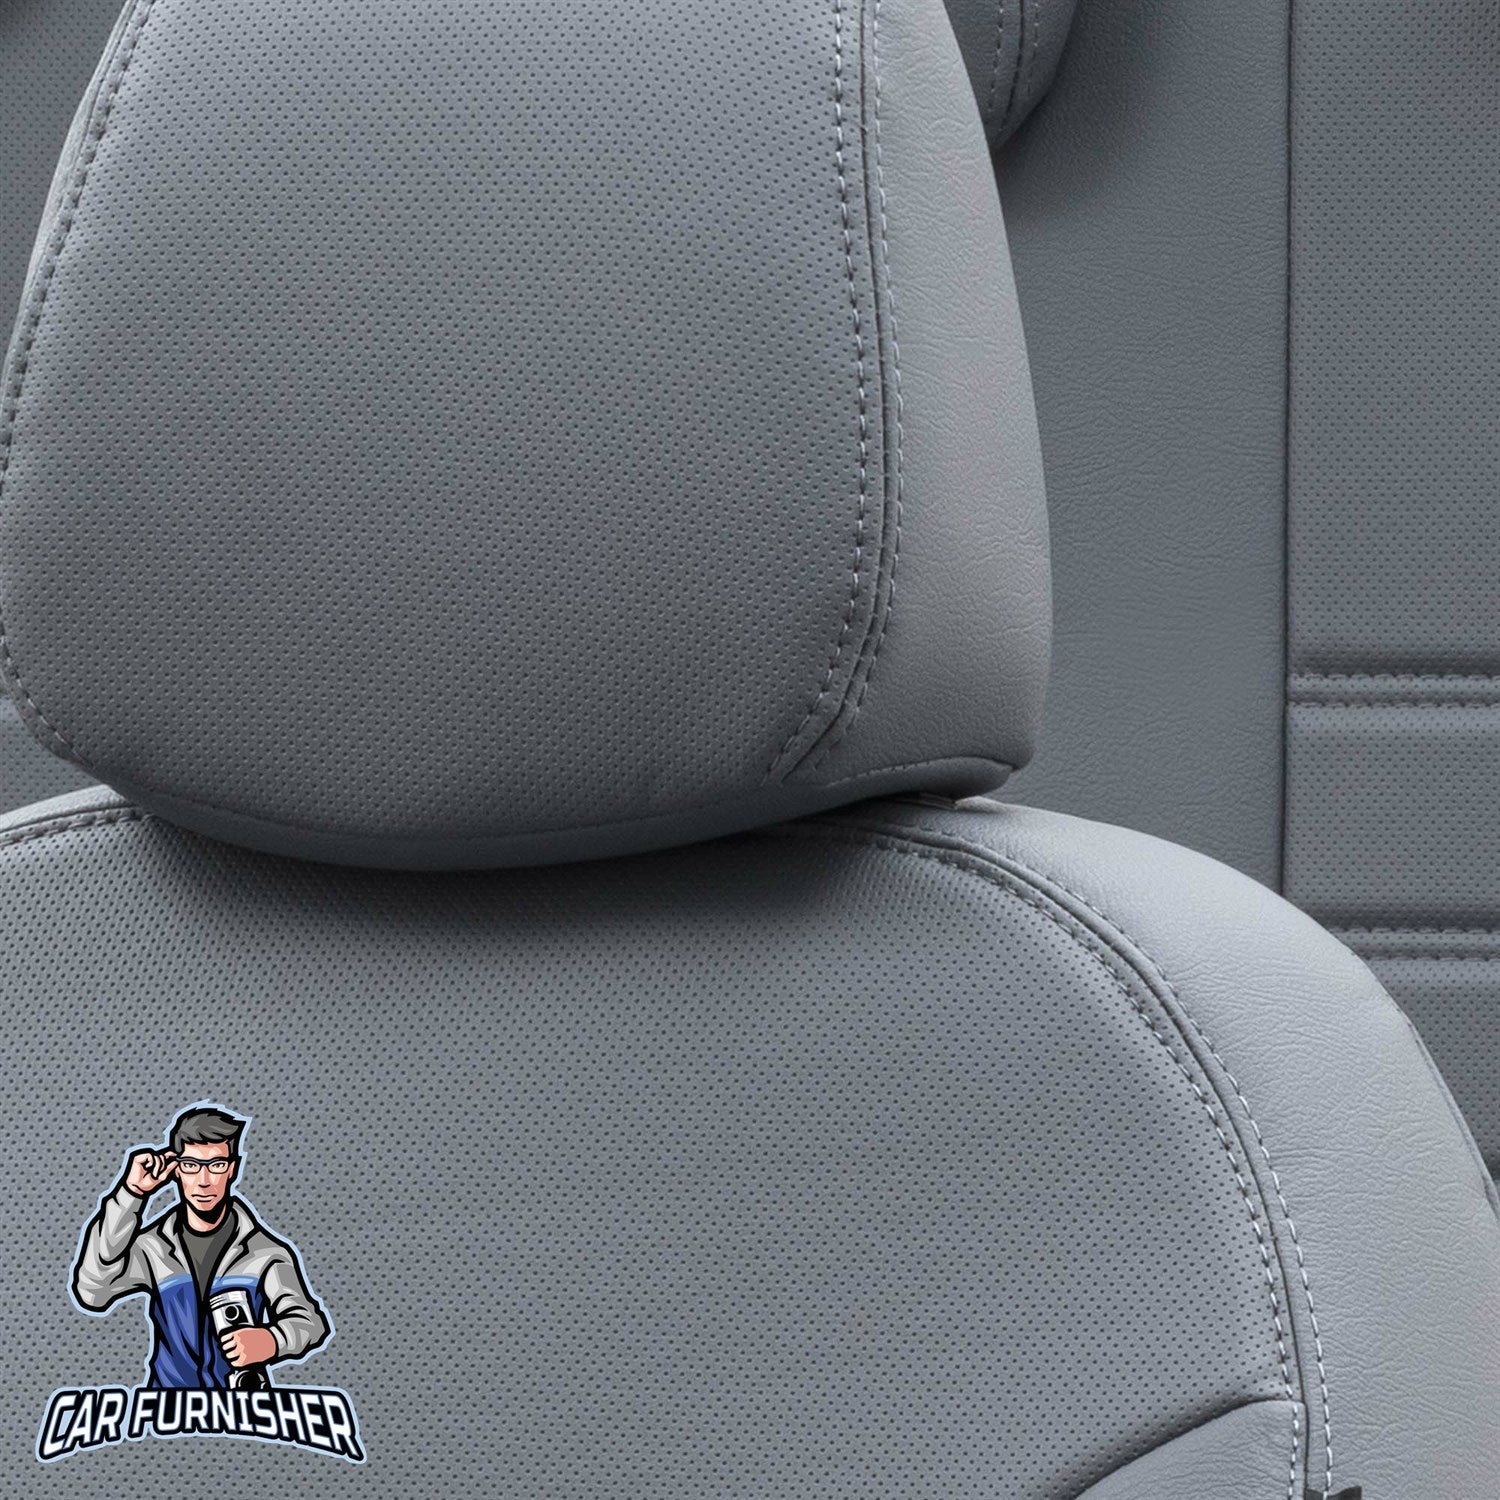 Chevrolet Rezzo Car Seat Covers 2004-2008 CDX/U100 Istanbul Smoked Full Set (5 Seats + Handrest) Leather & Fabric